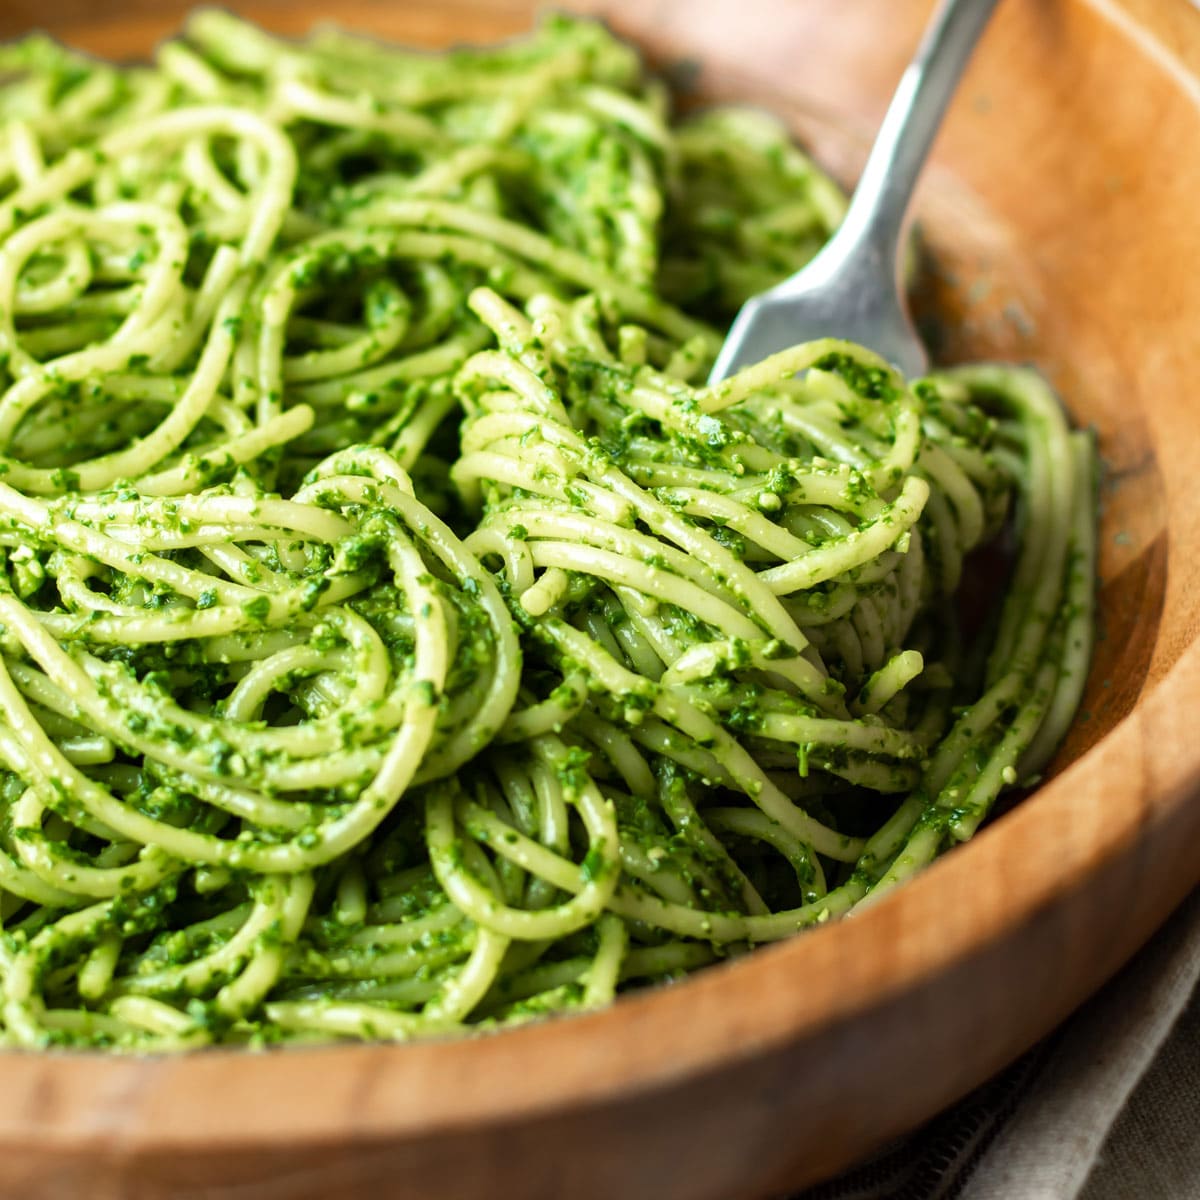 https://www.girlgonegourmet.com/wp-content/uploads/2023/02/Spinach-Parsley-Pesto-square-featured.jpg